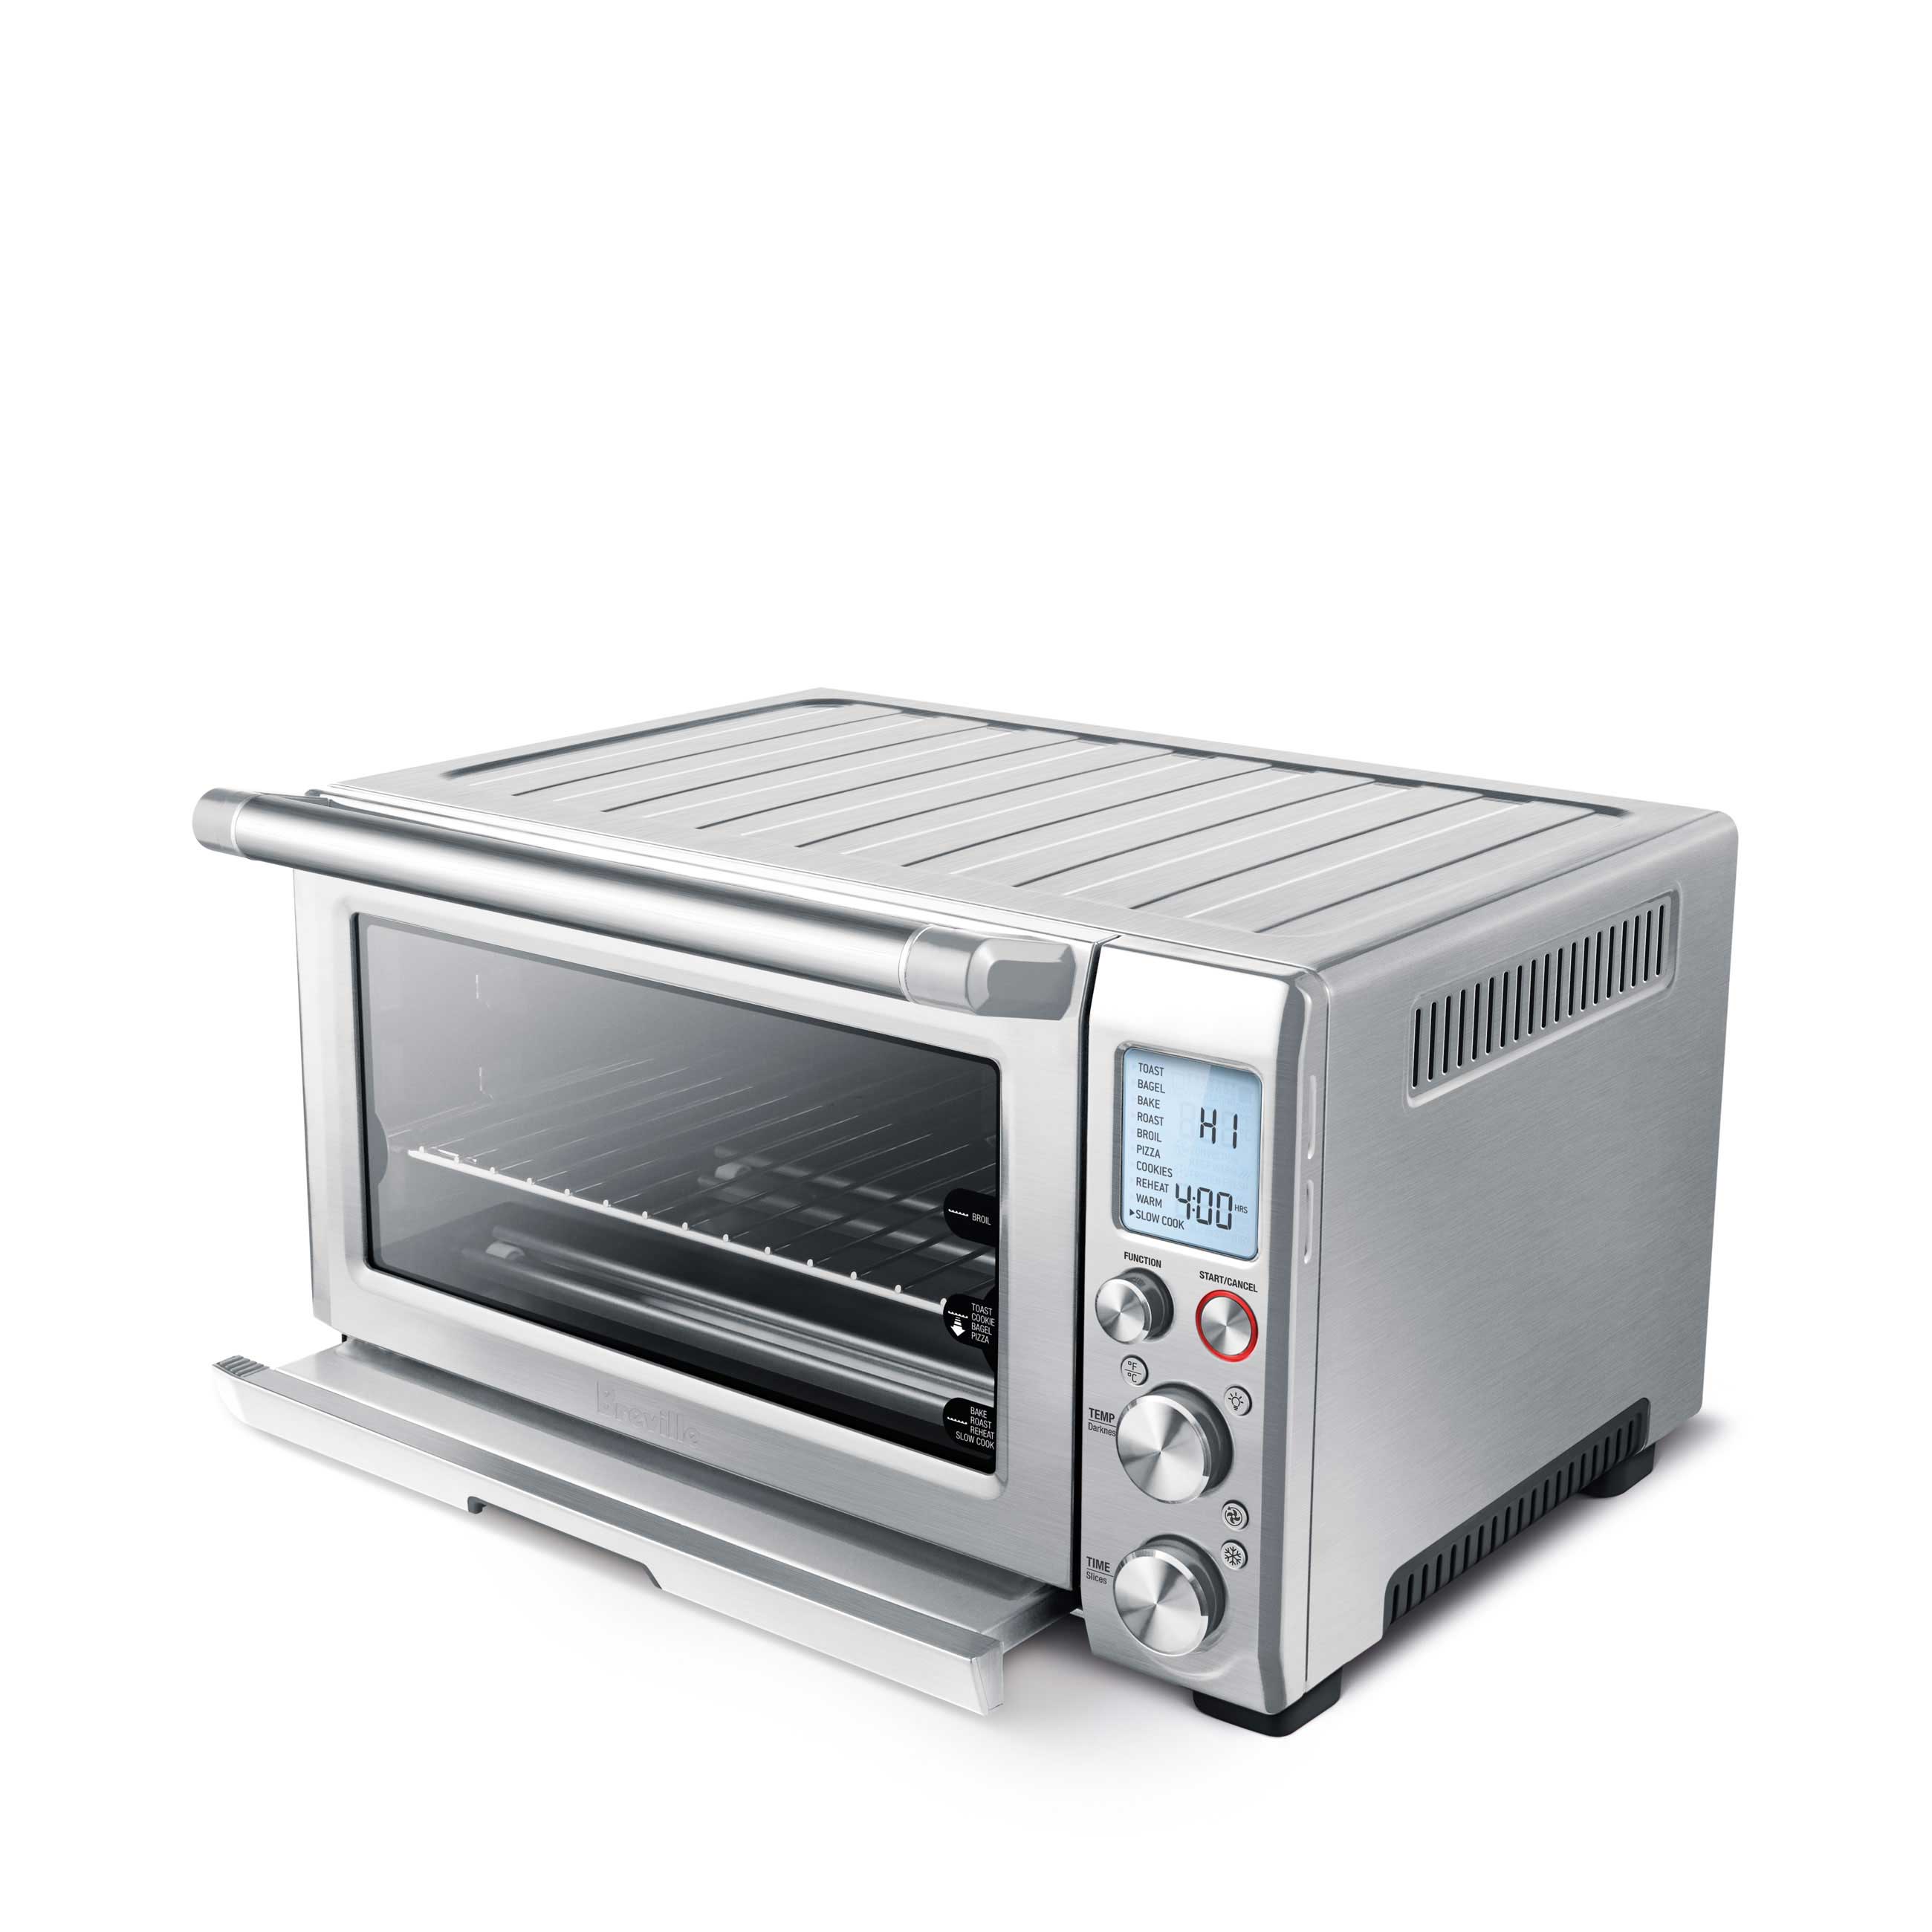  the Smart Oven™ Pro Ovens in Brushed Stainless Steel with lcd display